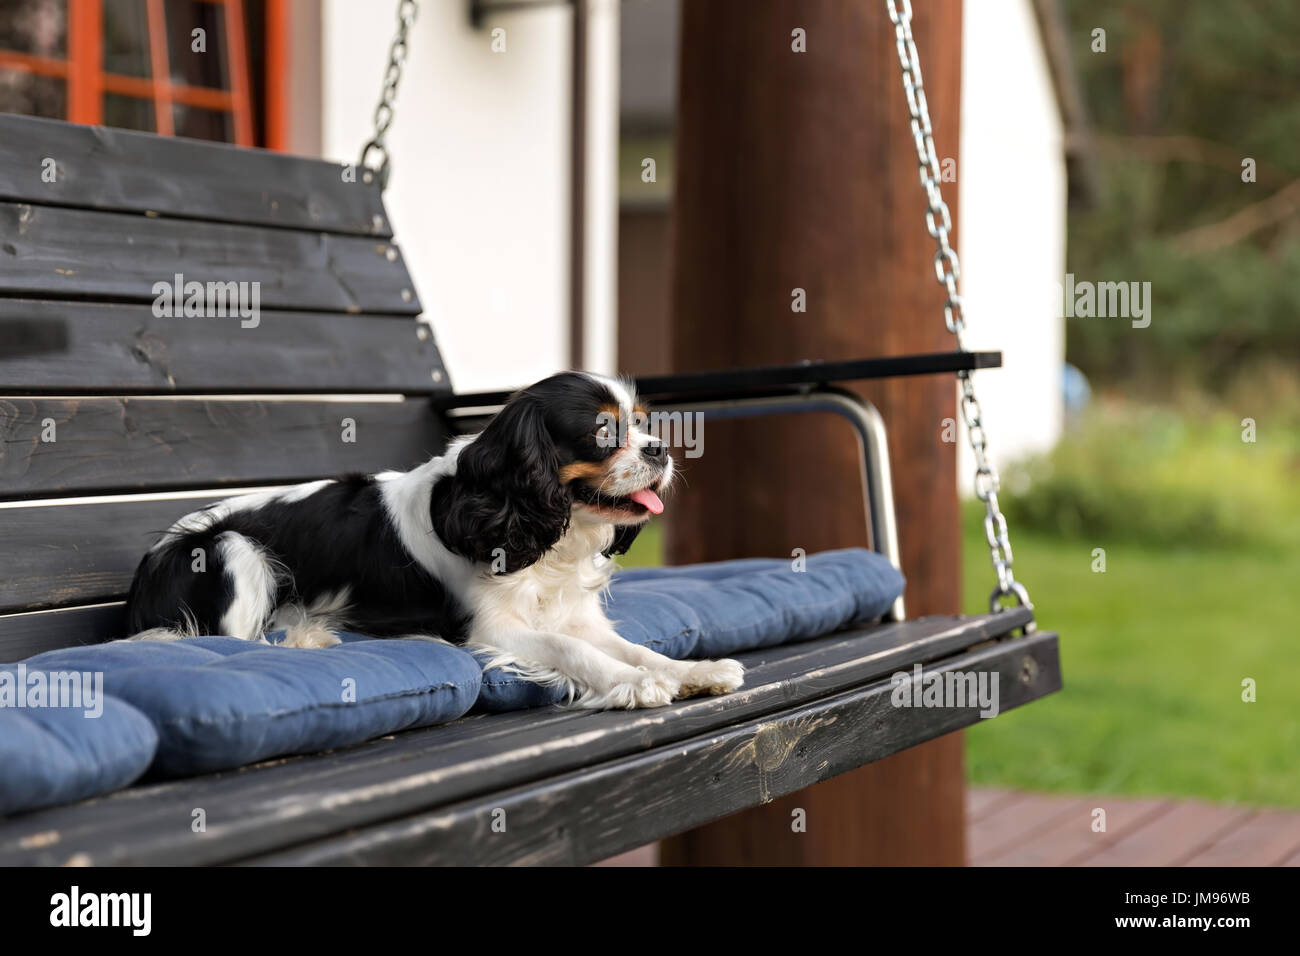 cute dog relaxing on the wooden bench in the garden Stock Photo